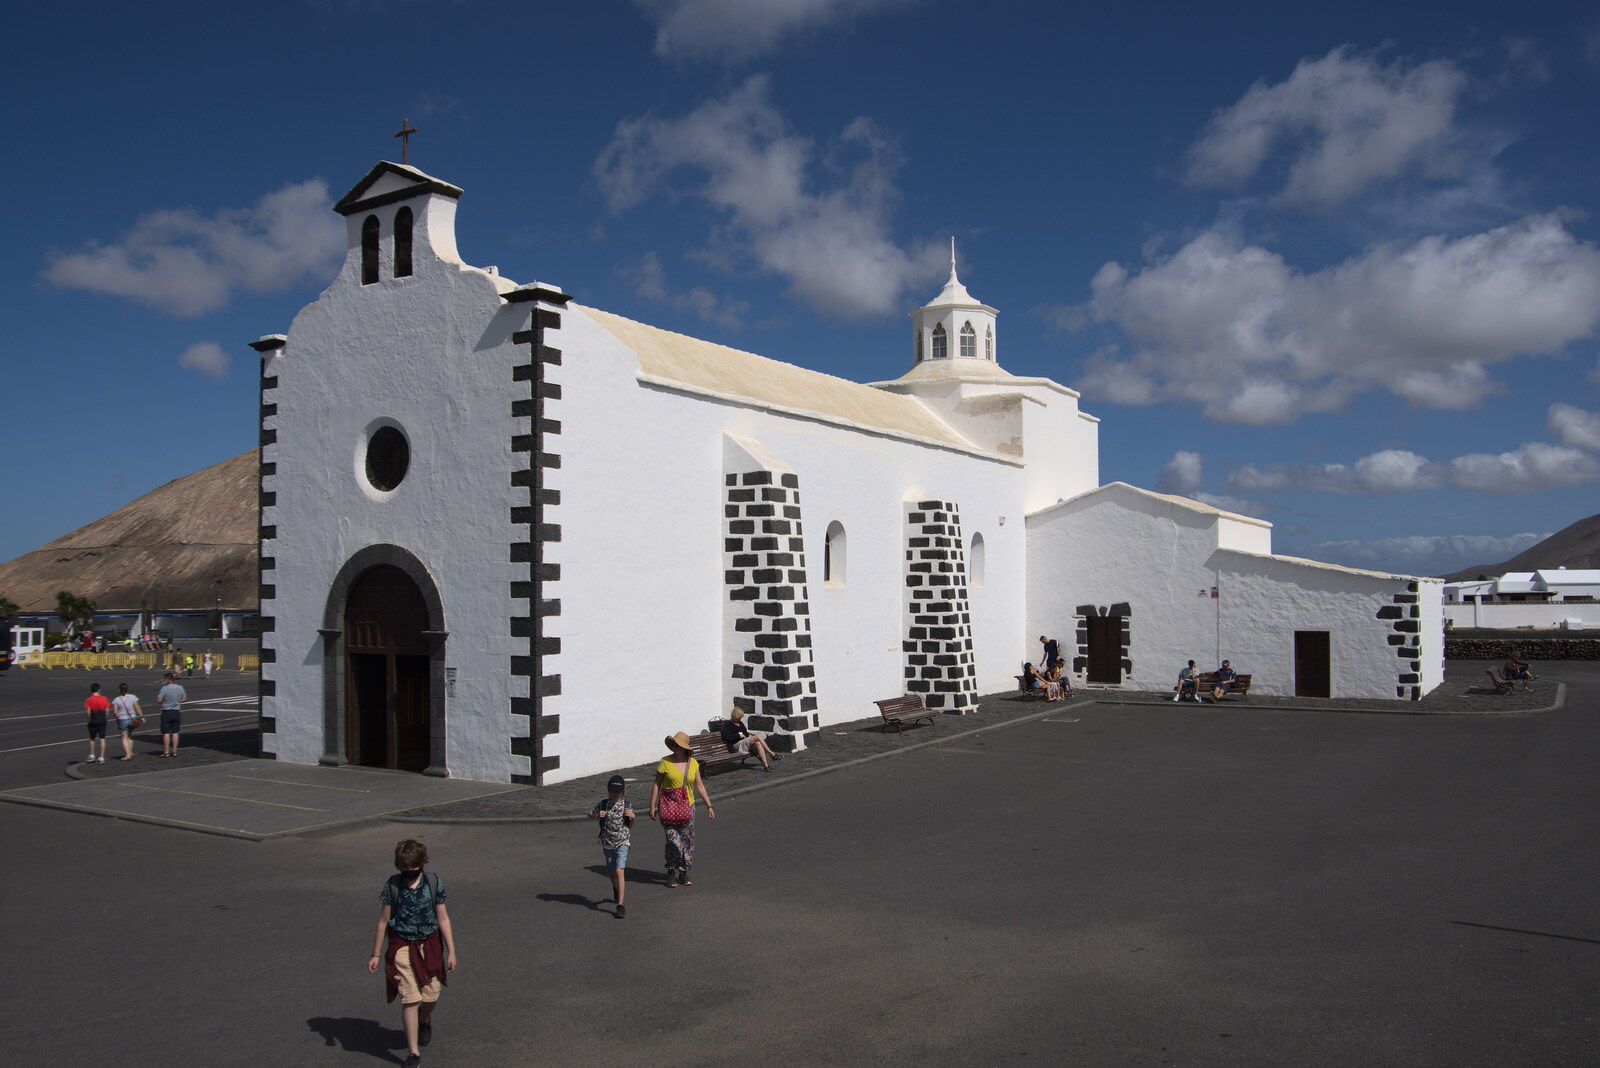 The Sanctuary of Our Lady of Sorrows, Mancha Blanca from The Volcanoes of Lanzarote, Canary Islands, Spain - 27th October 2021